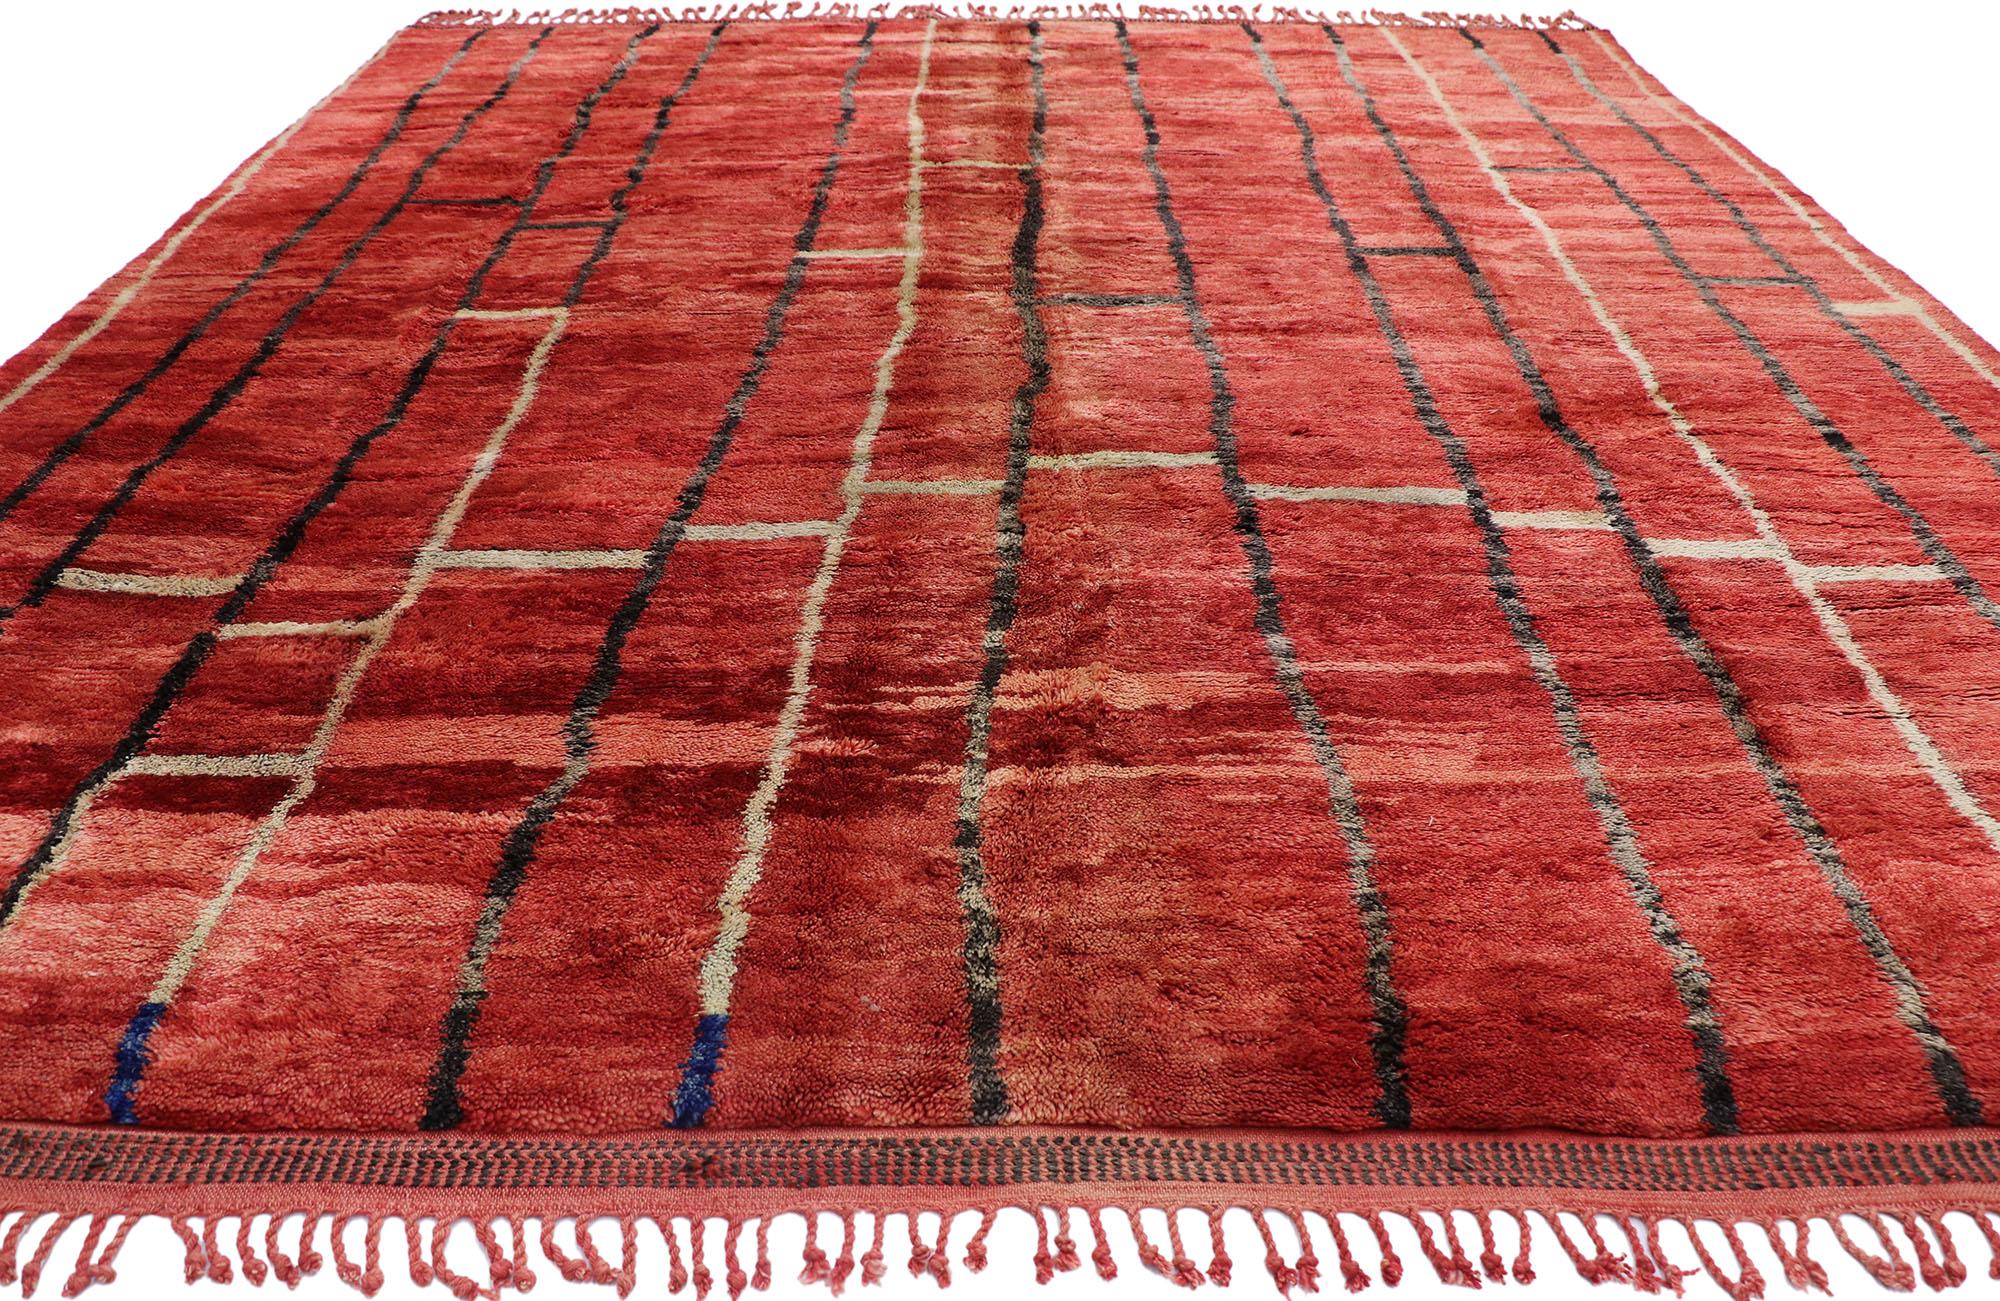 Expressionist New Contemporary Berber Moroccan Rug Inspired by Gerhard Richter